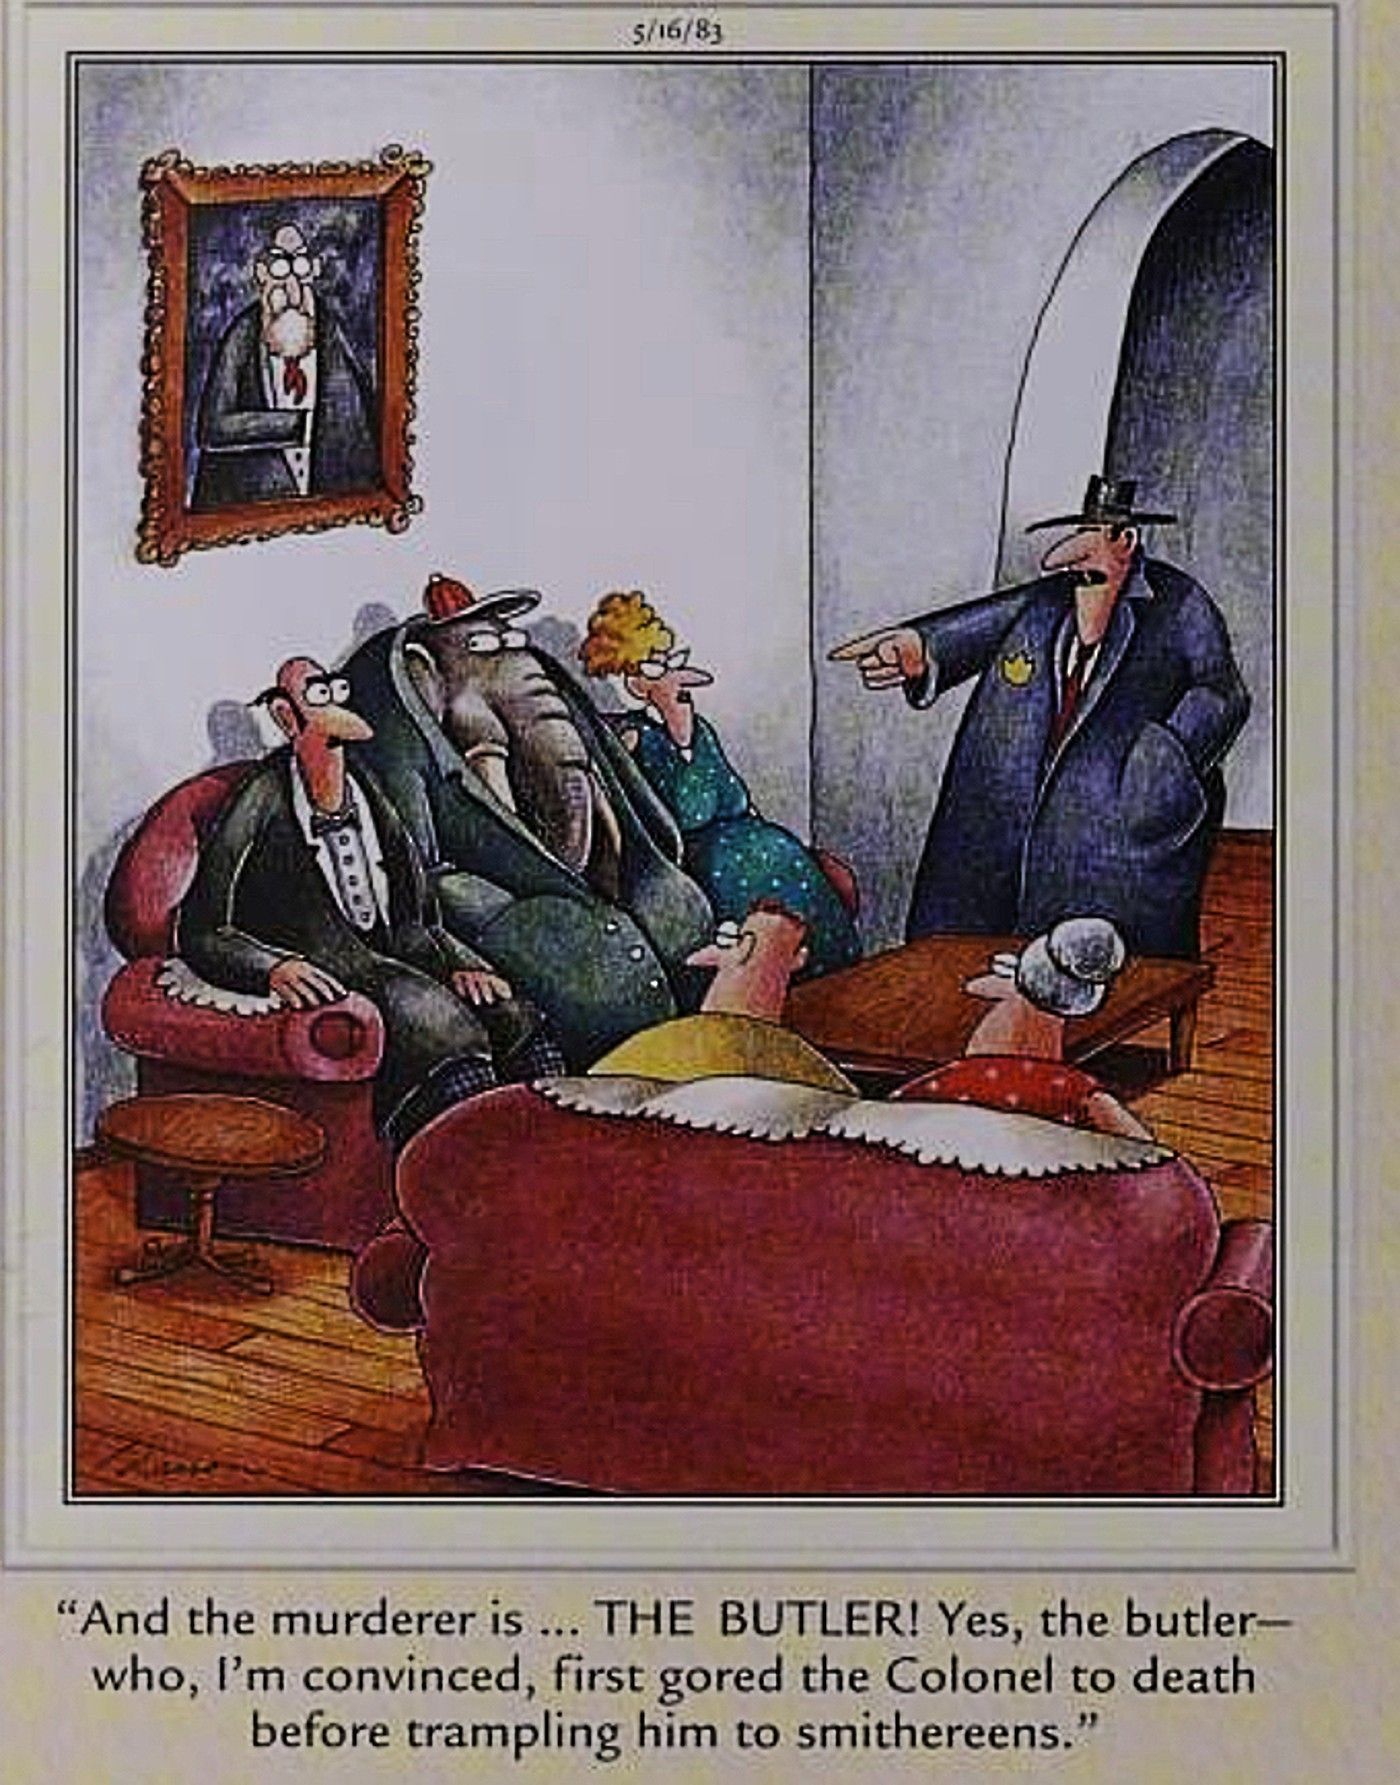 The Far Side comic featuring a butler being wrongly accused of a crime over a guilty elephant.